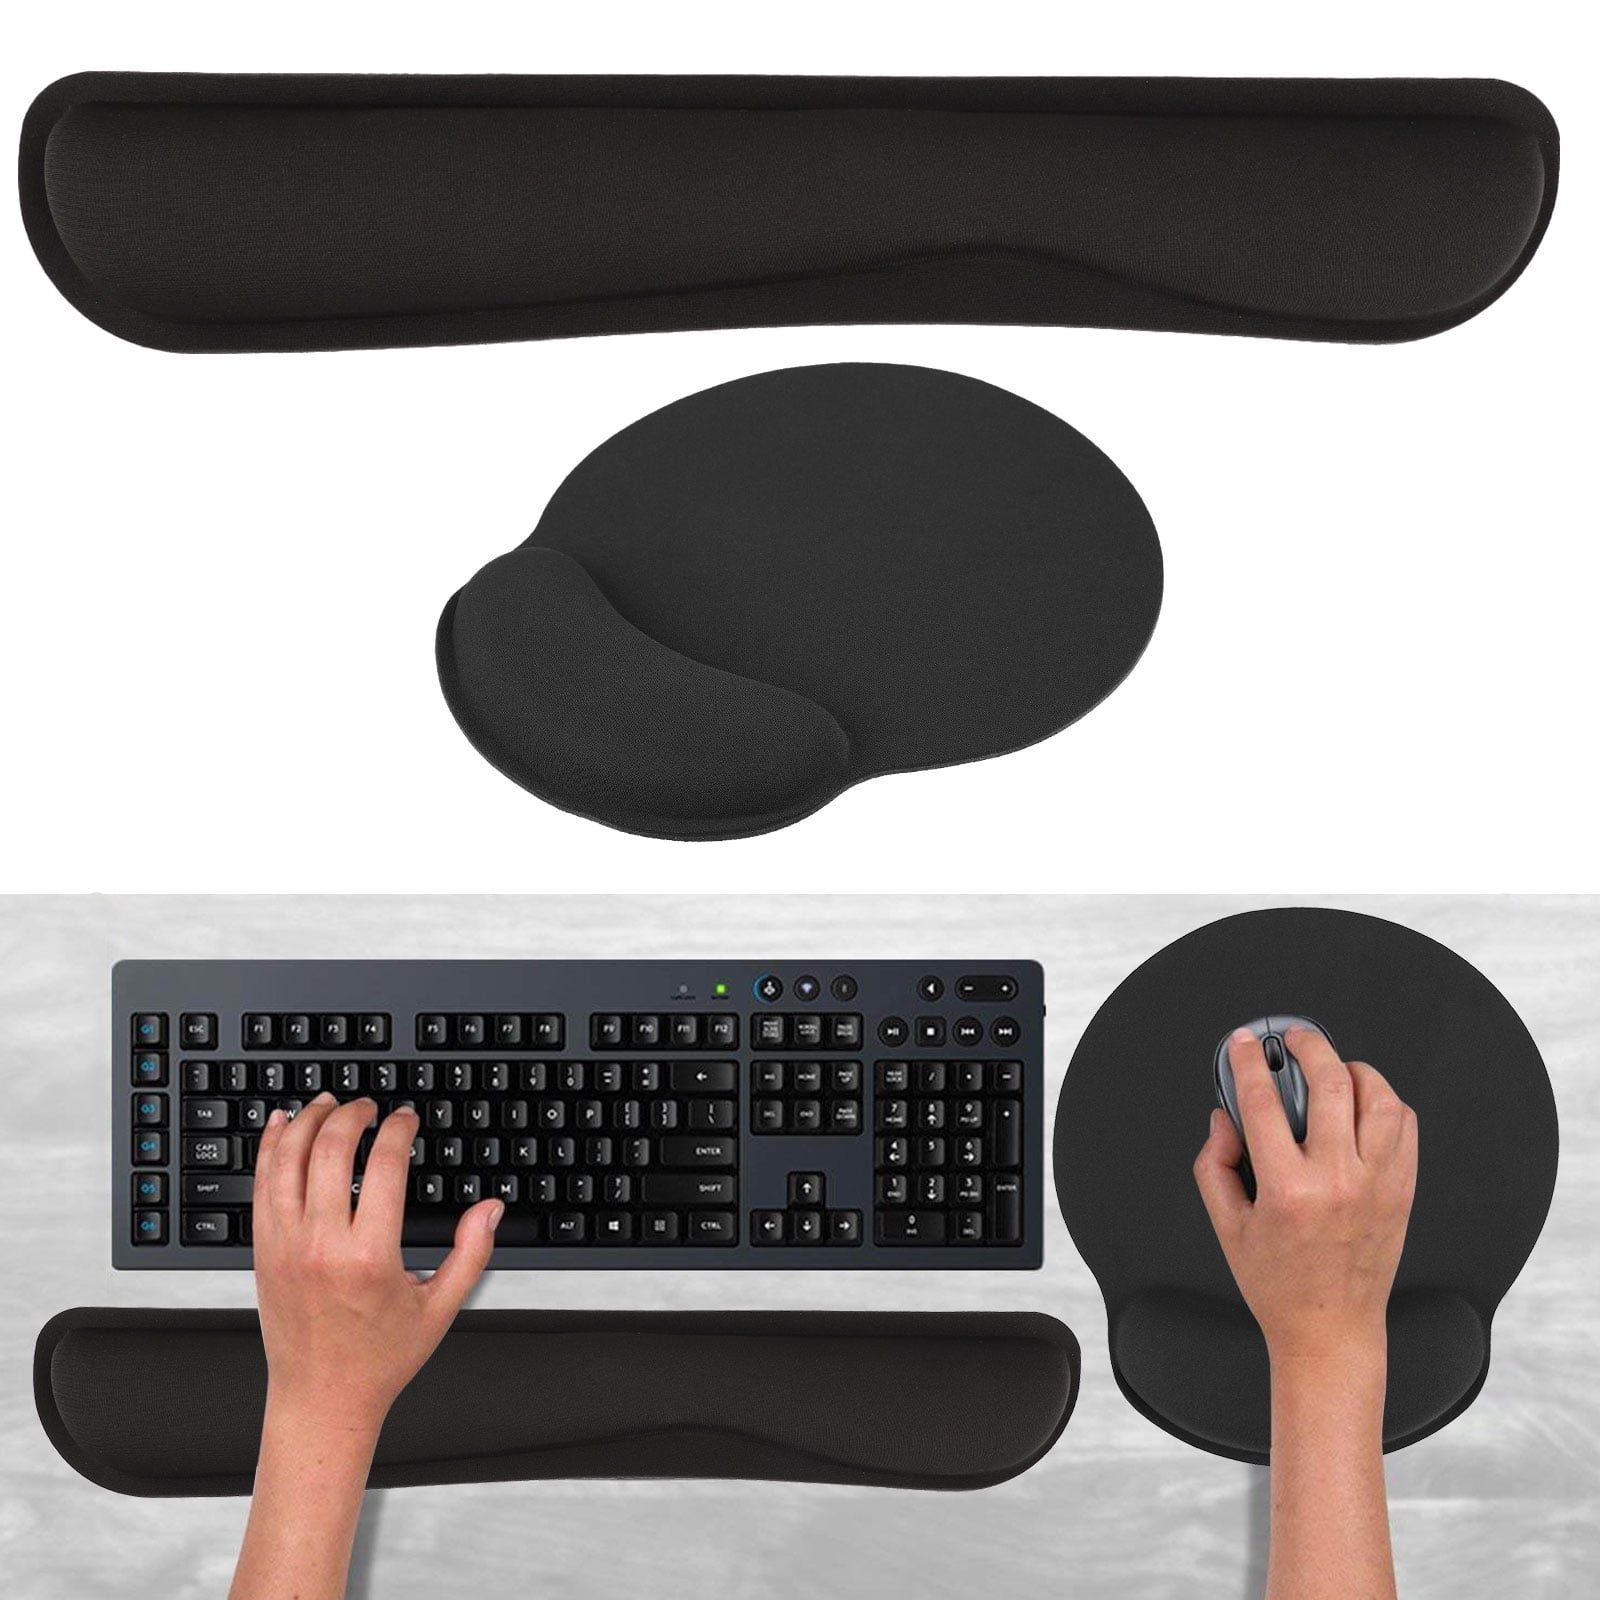 Ergonomic Mouse Pad with Wrist Support, Gaming Mouse Mat with Gel Wrist Rest,  Easy Typing 